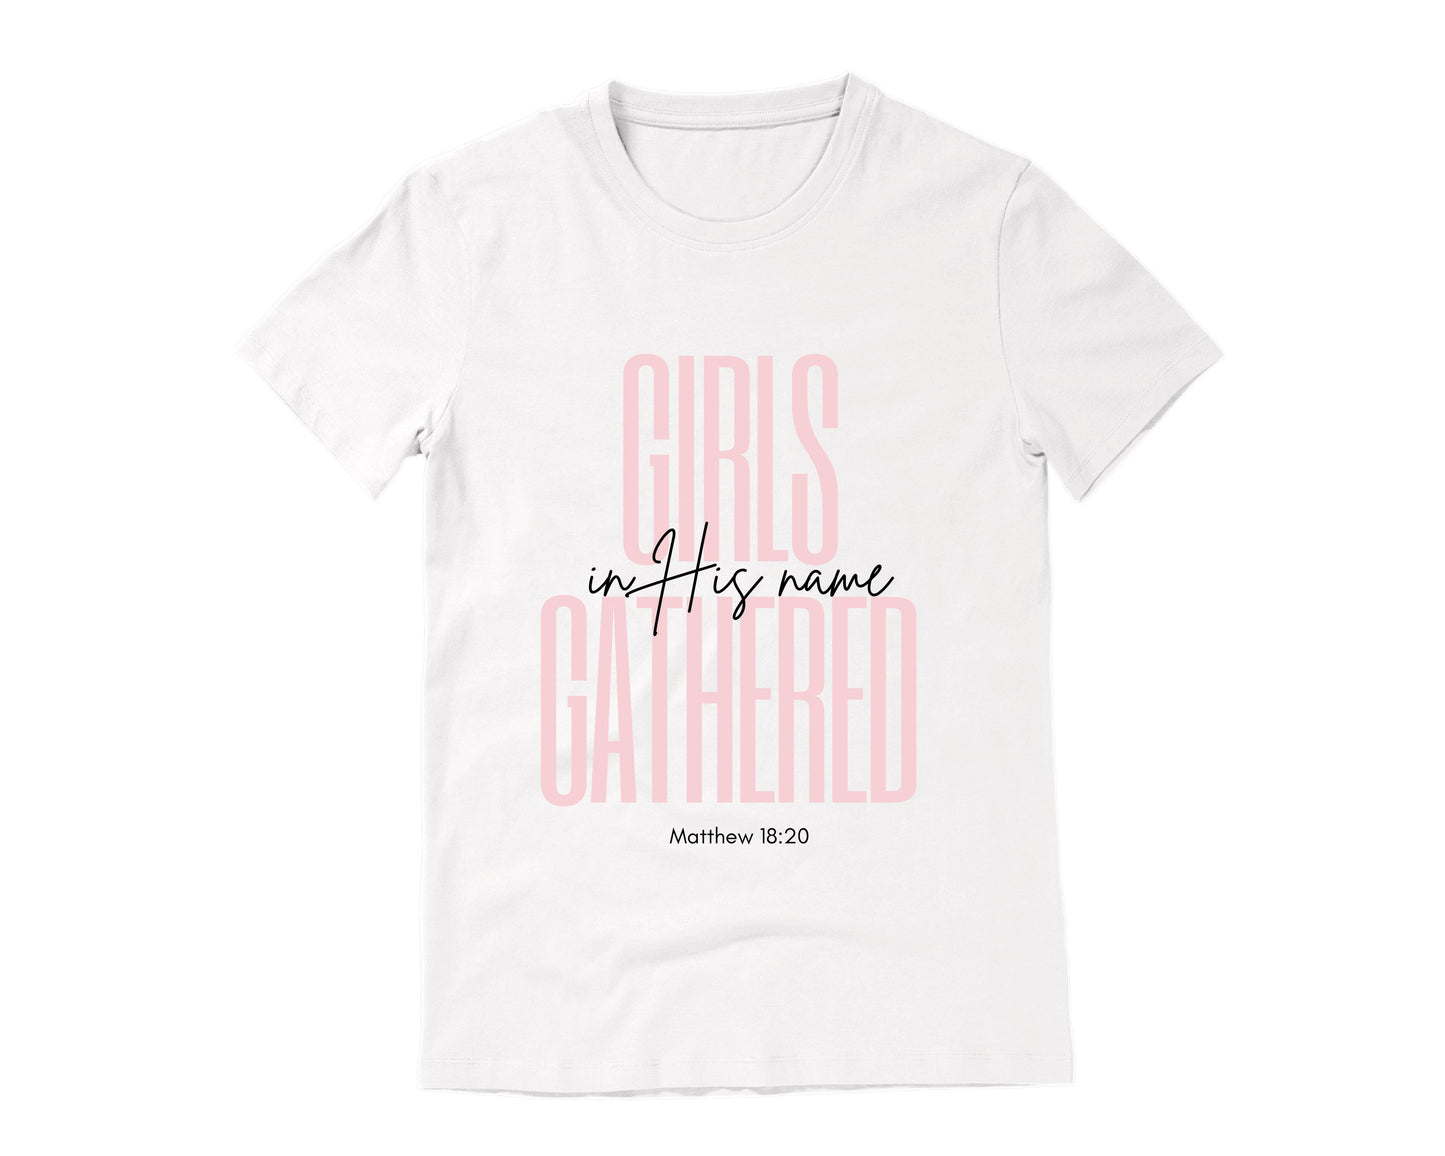 Christian Women's T-Shirt for Small Groups in White